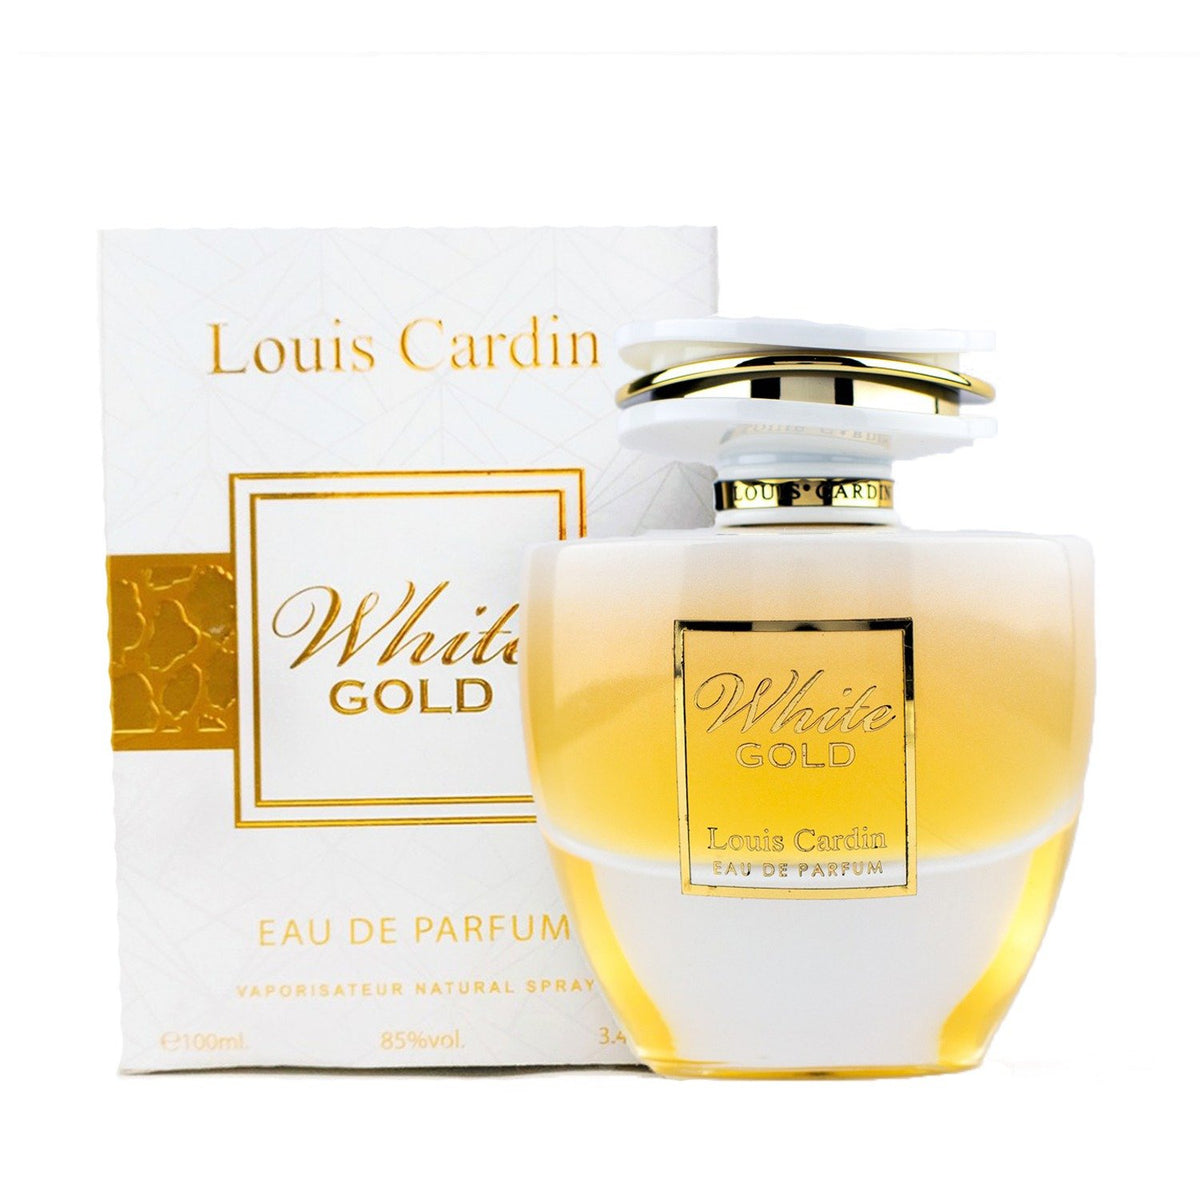 Louis Cardin White Gold - Best Men and Women Perfume Cologne Oud Scent